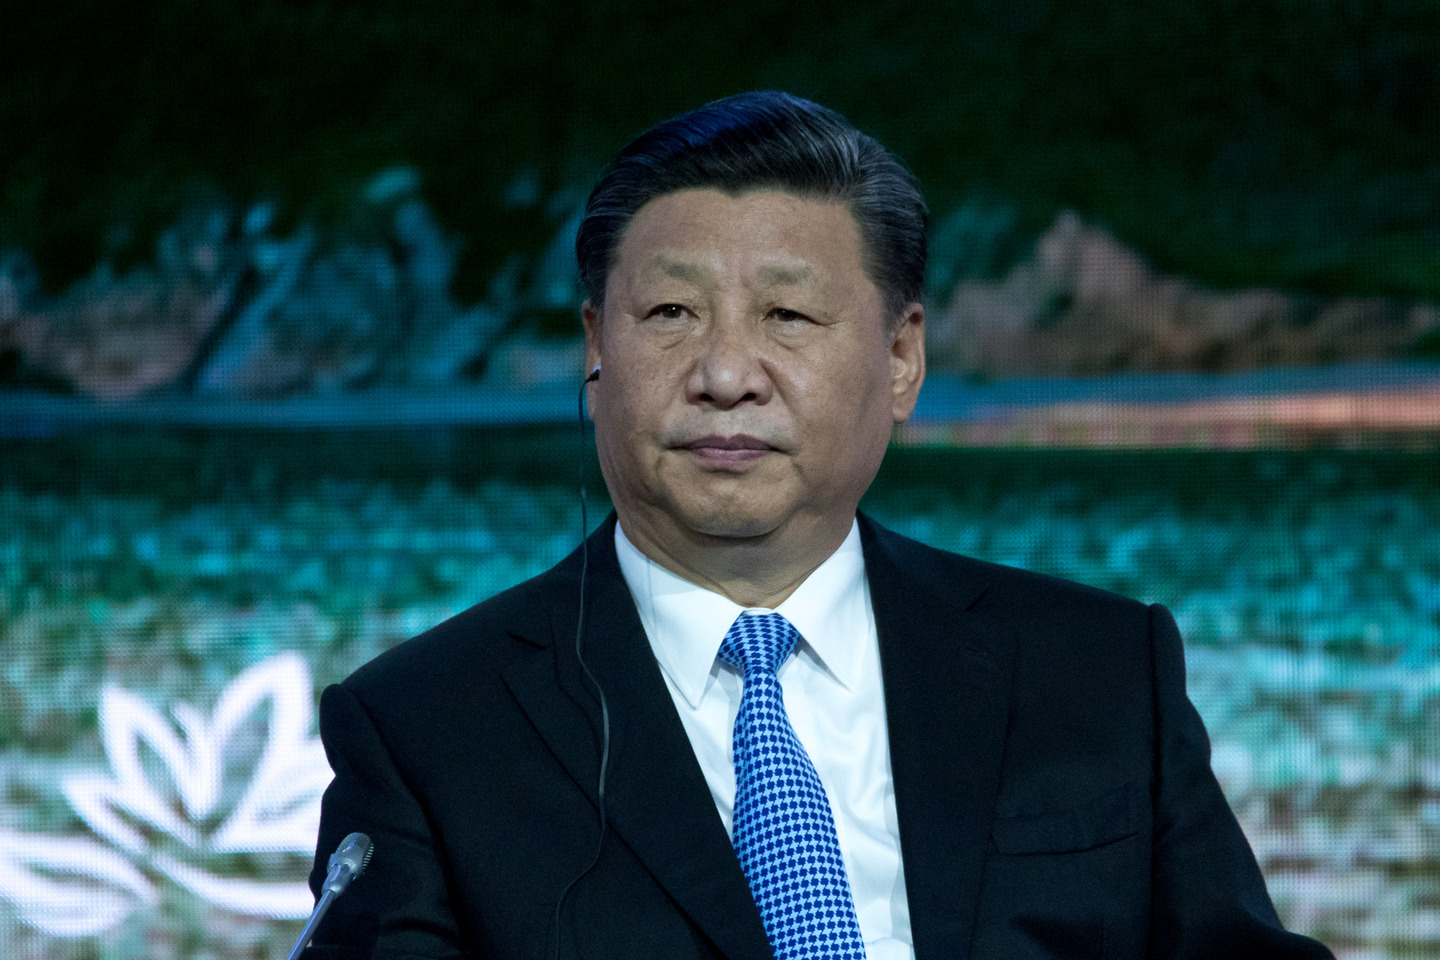 If China under Xi Jinping has set its mind to catching up on AI memory chips - it will probably find a way.